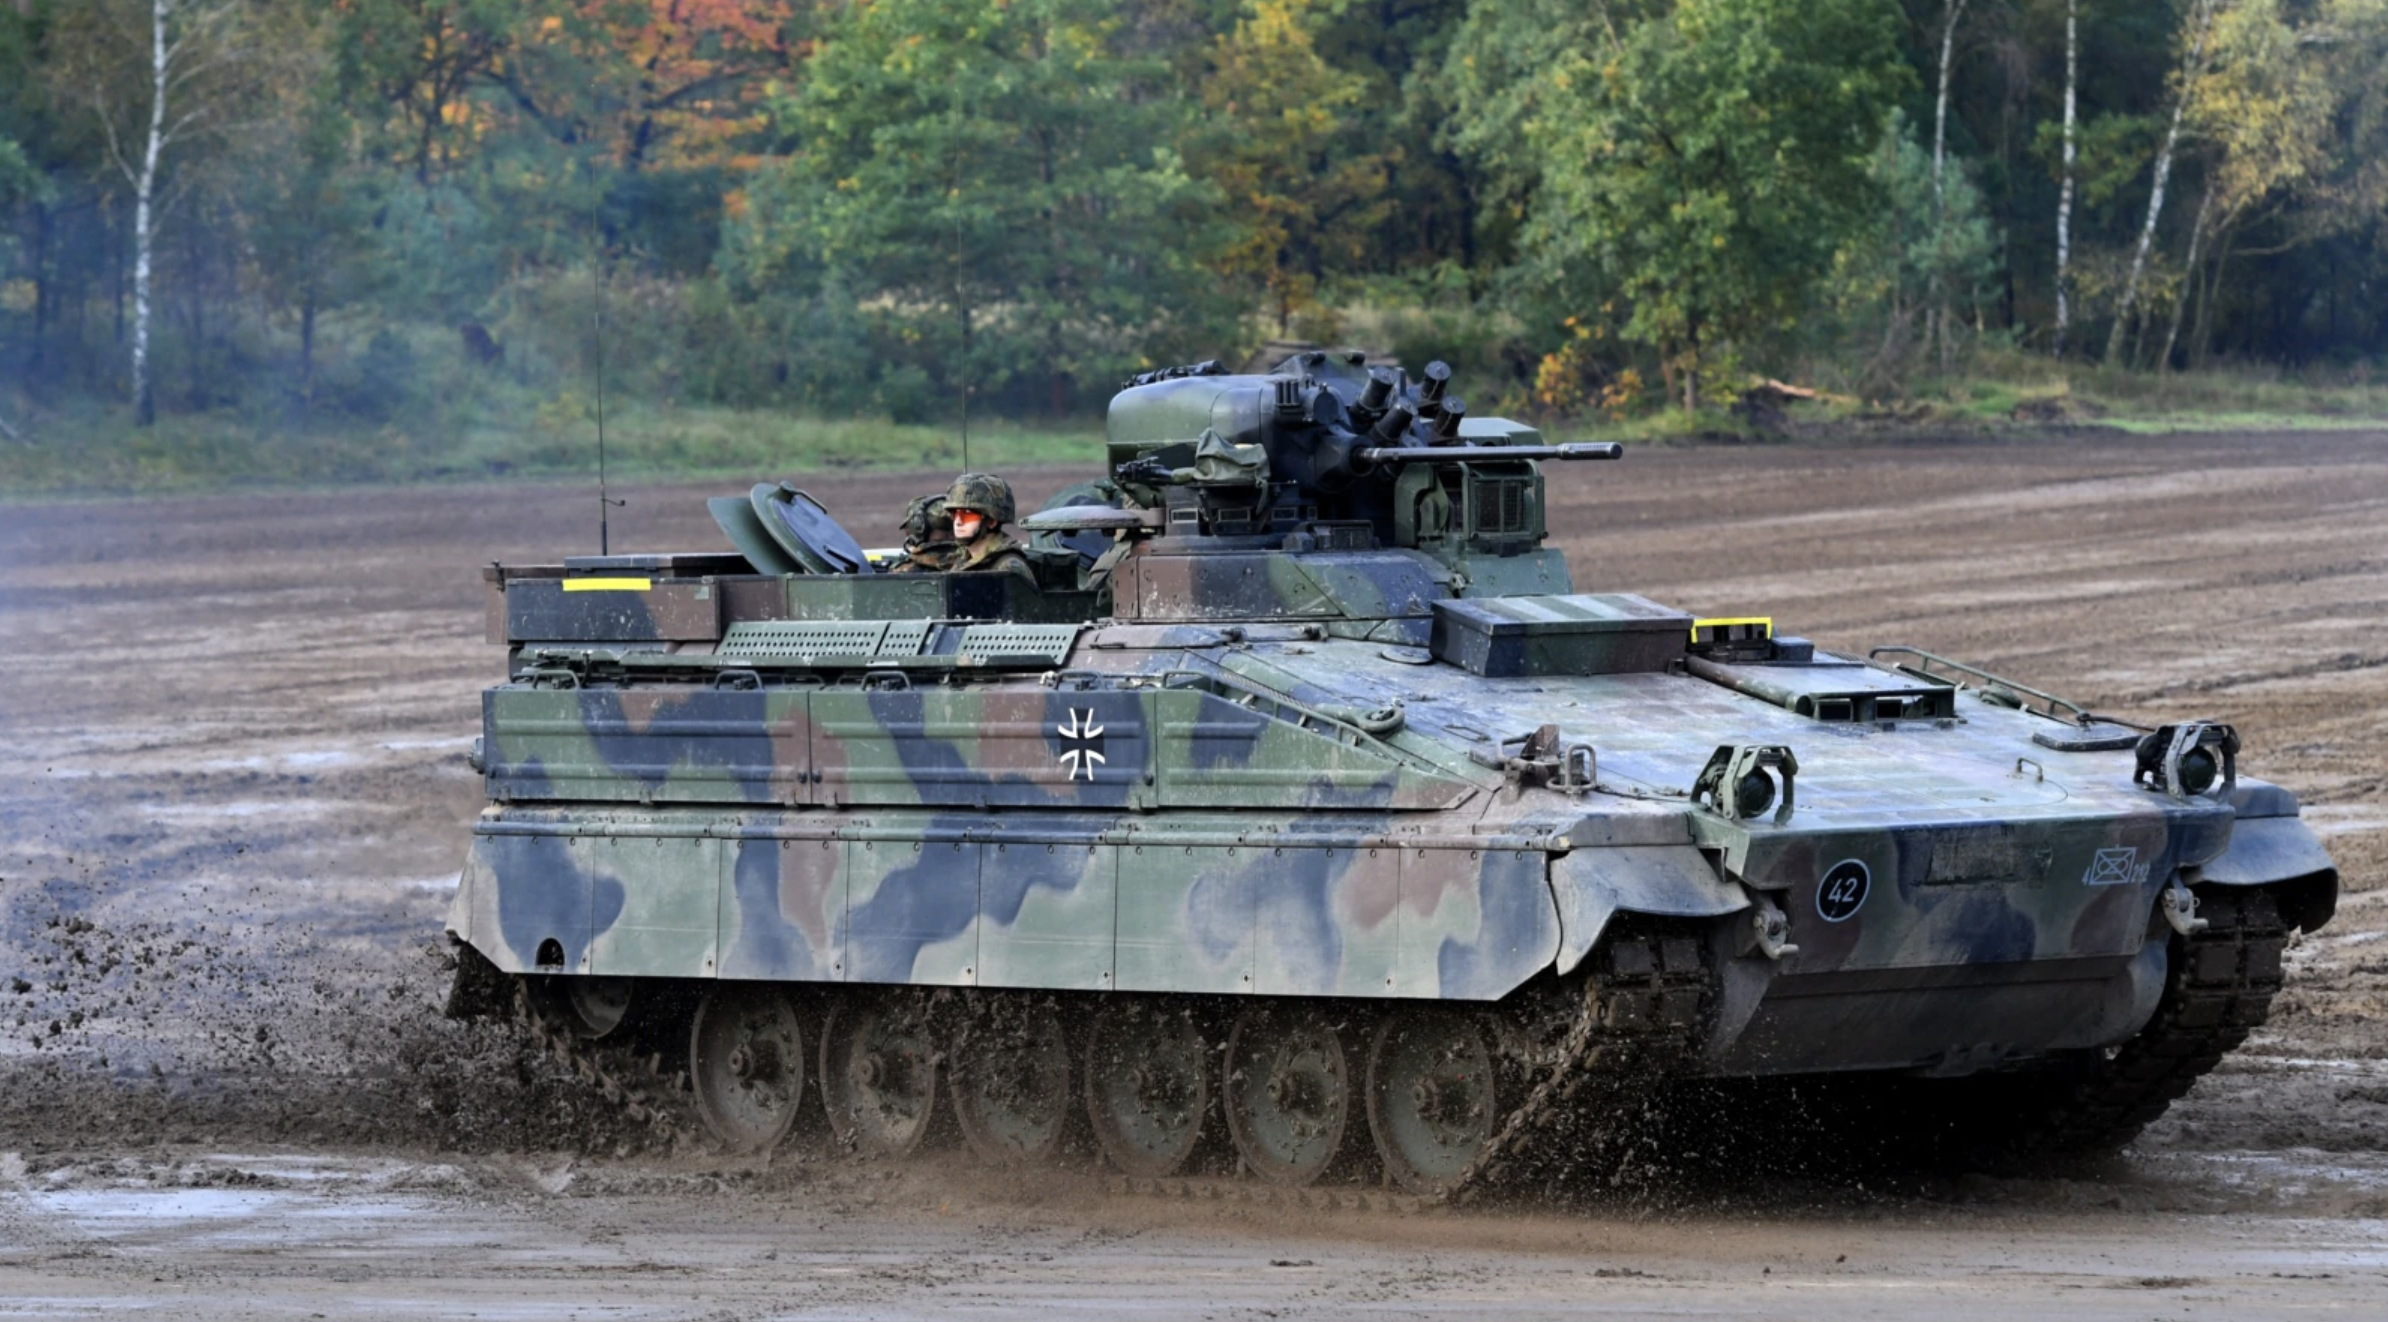 Germany transfers 40 Marder infantry fighting vehicles along with 18 Leopard 2A6 tanks to Ukraine - WELT